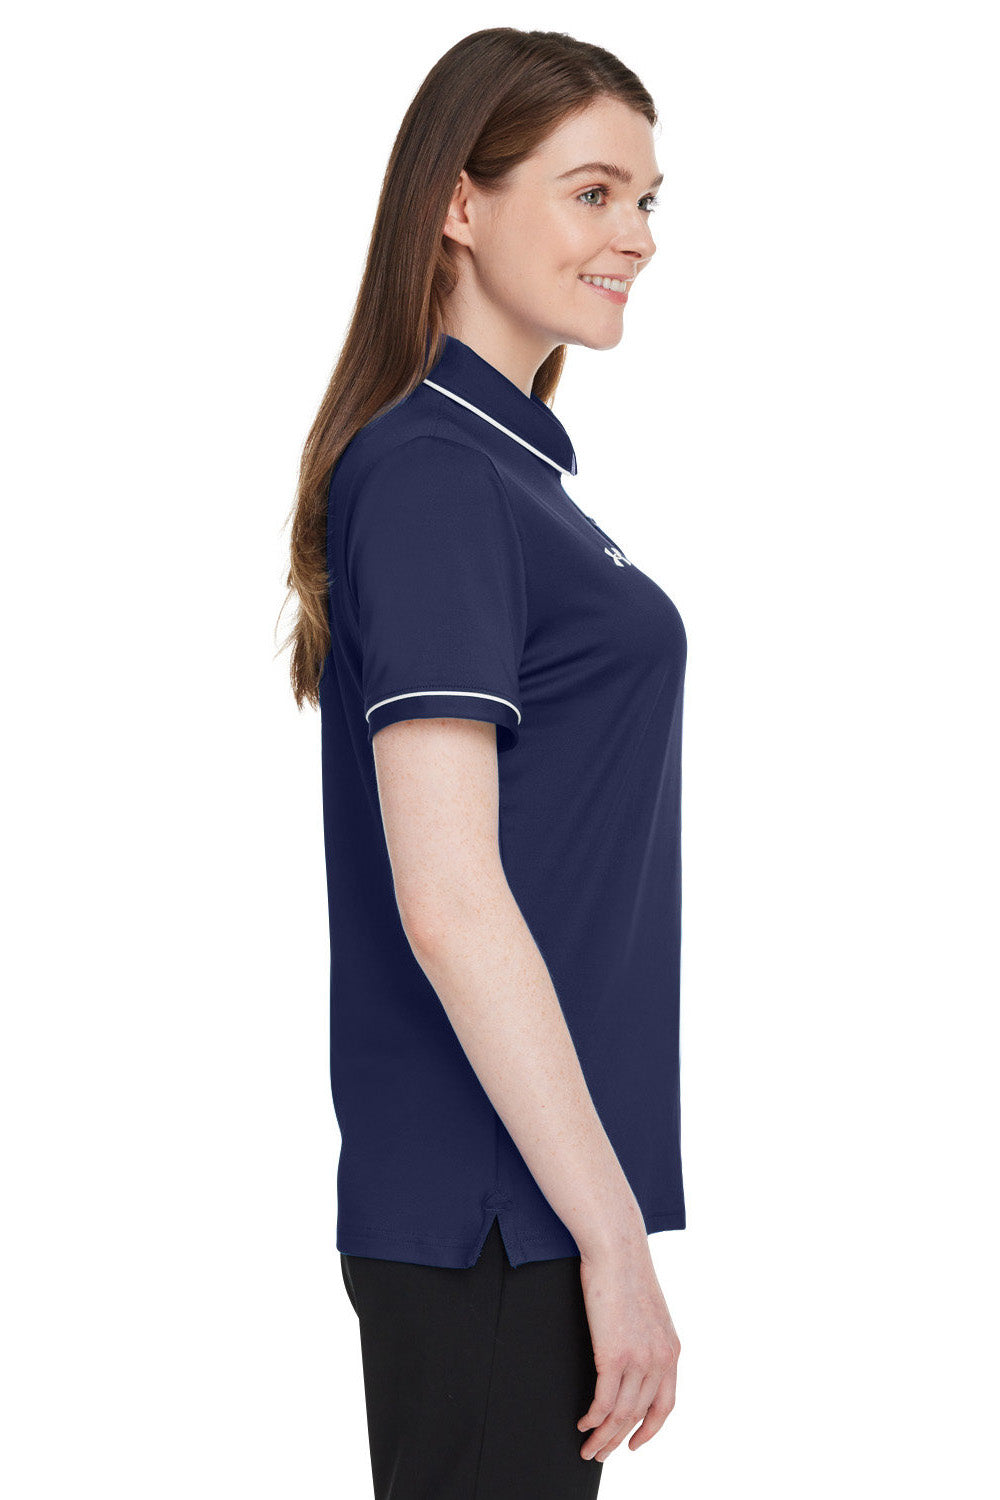 Under Armour 1376905 Womens Teams Performance Moisture Wicking Short Sleeve Polo Shirt Midnight Navy Blue Model Side